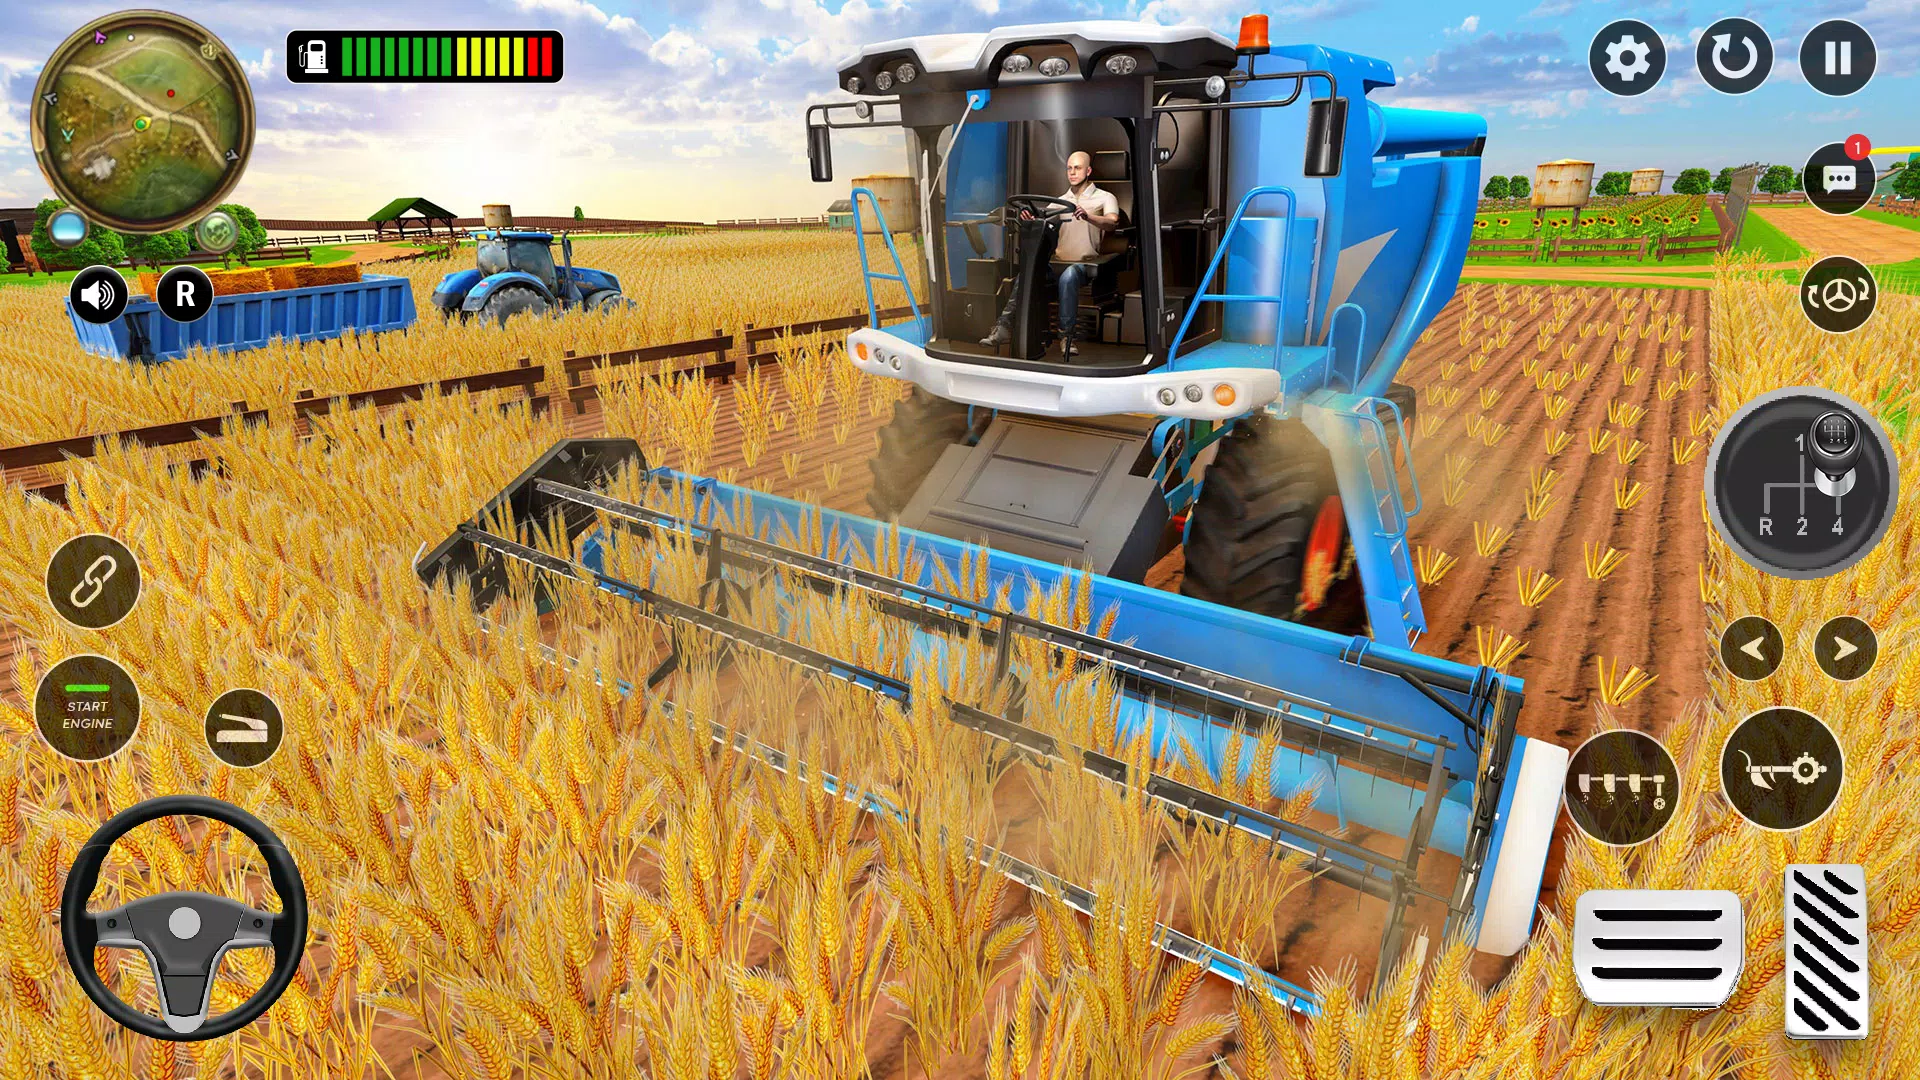 Jogo de Tractor Farming Simulator 2020 Android BR APK for Android Download